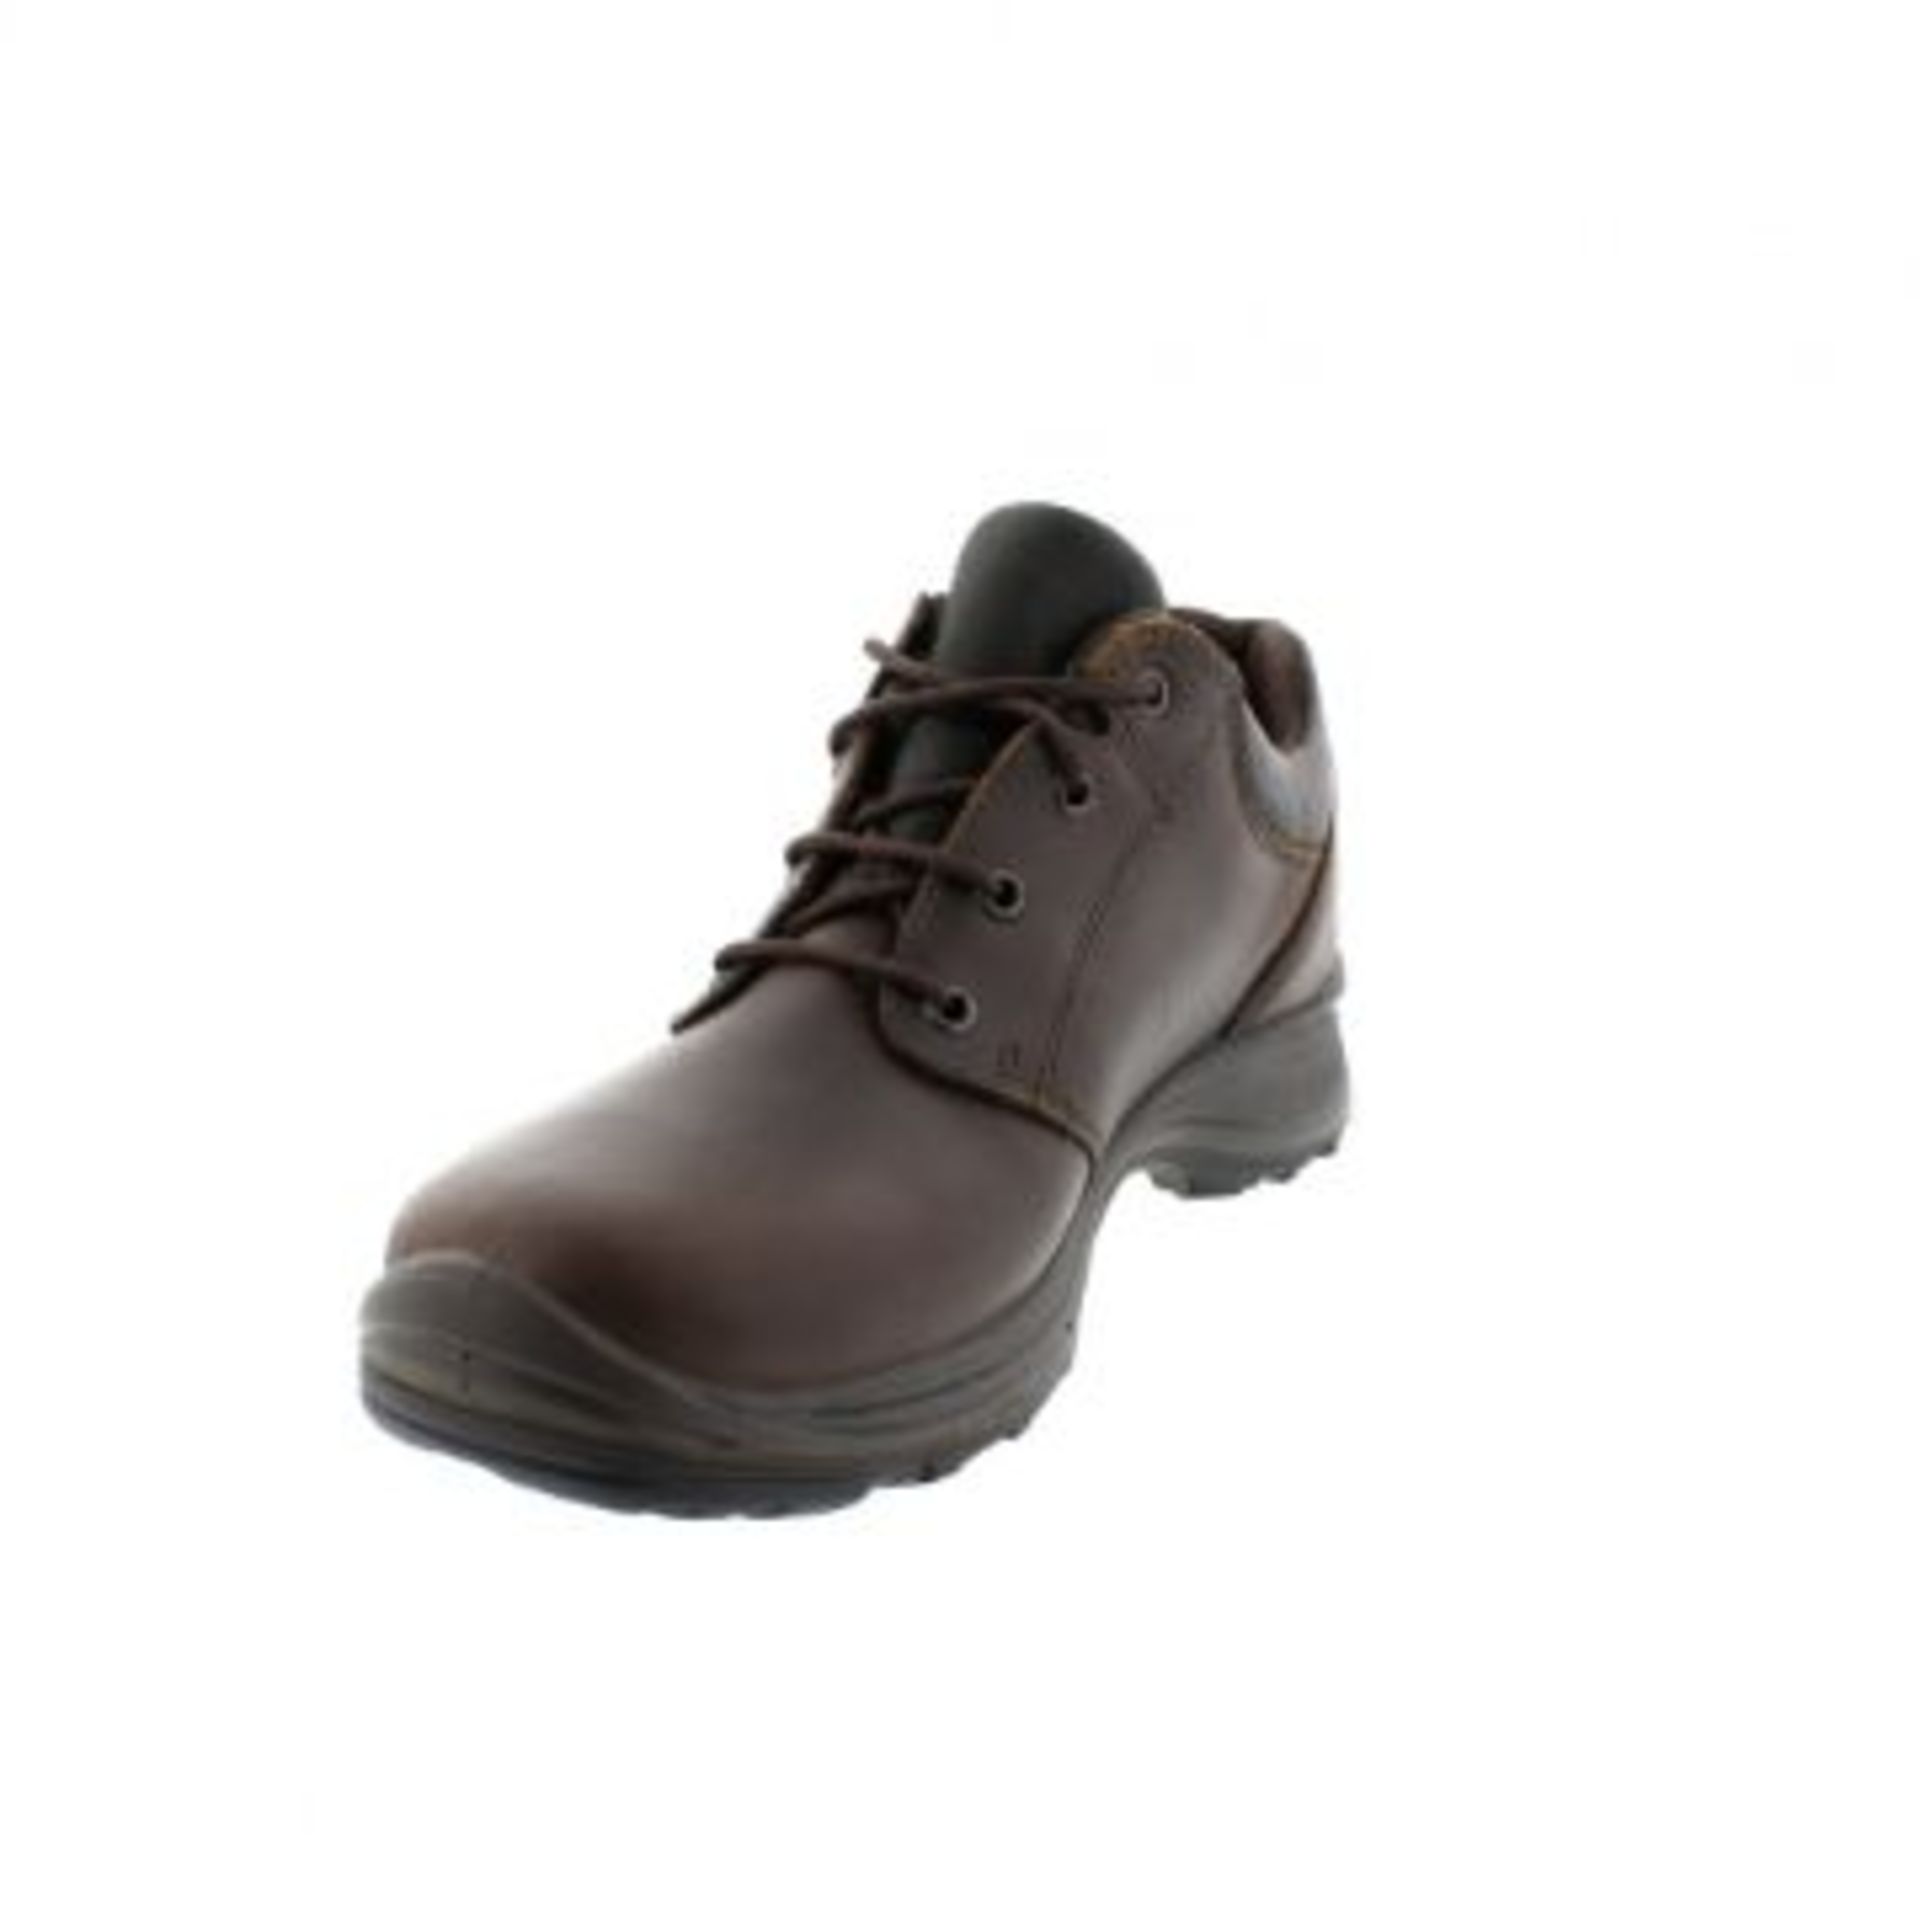 1 x Pair of Men's Grisport Brown Leather GriTex Shoes - Rogerson Footwear - Brand New and Boxed - - Image 4 of 6